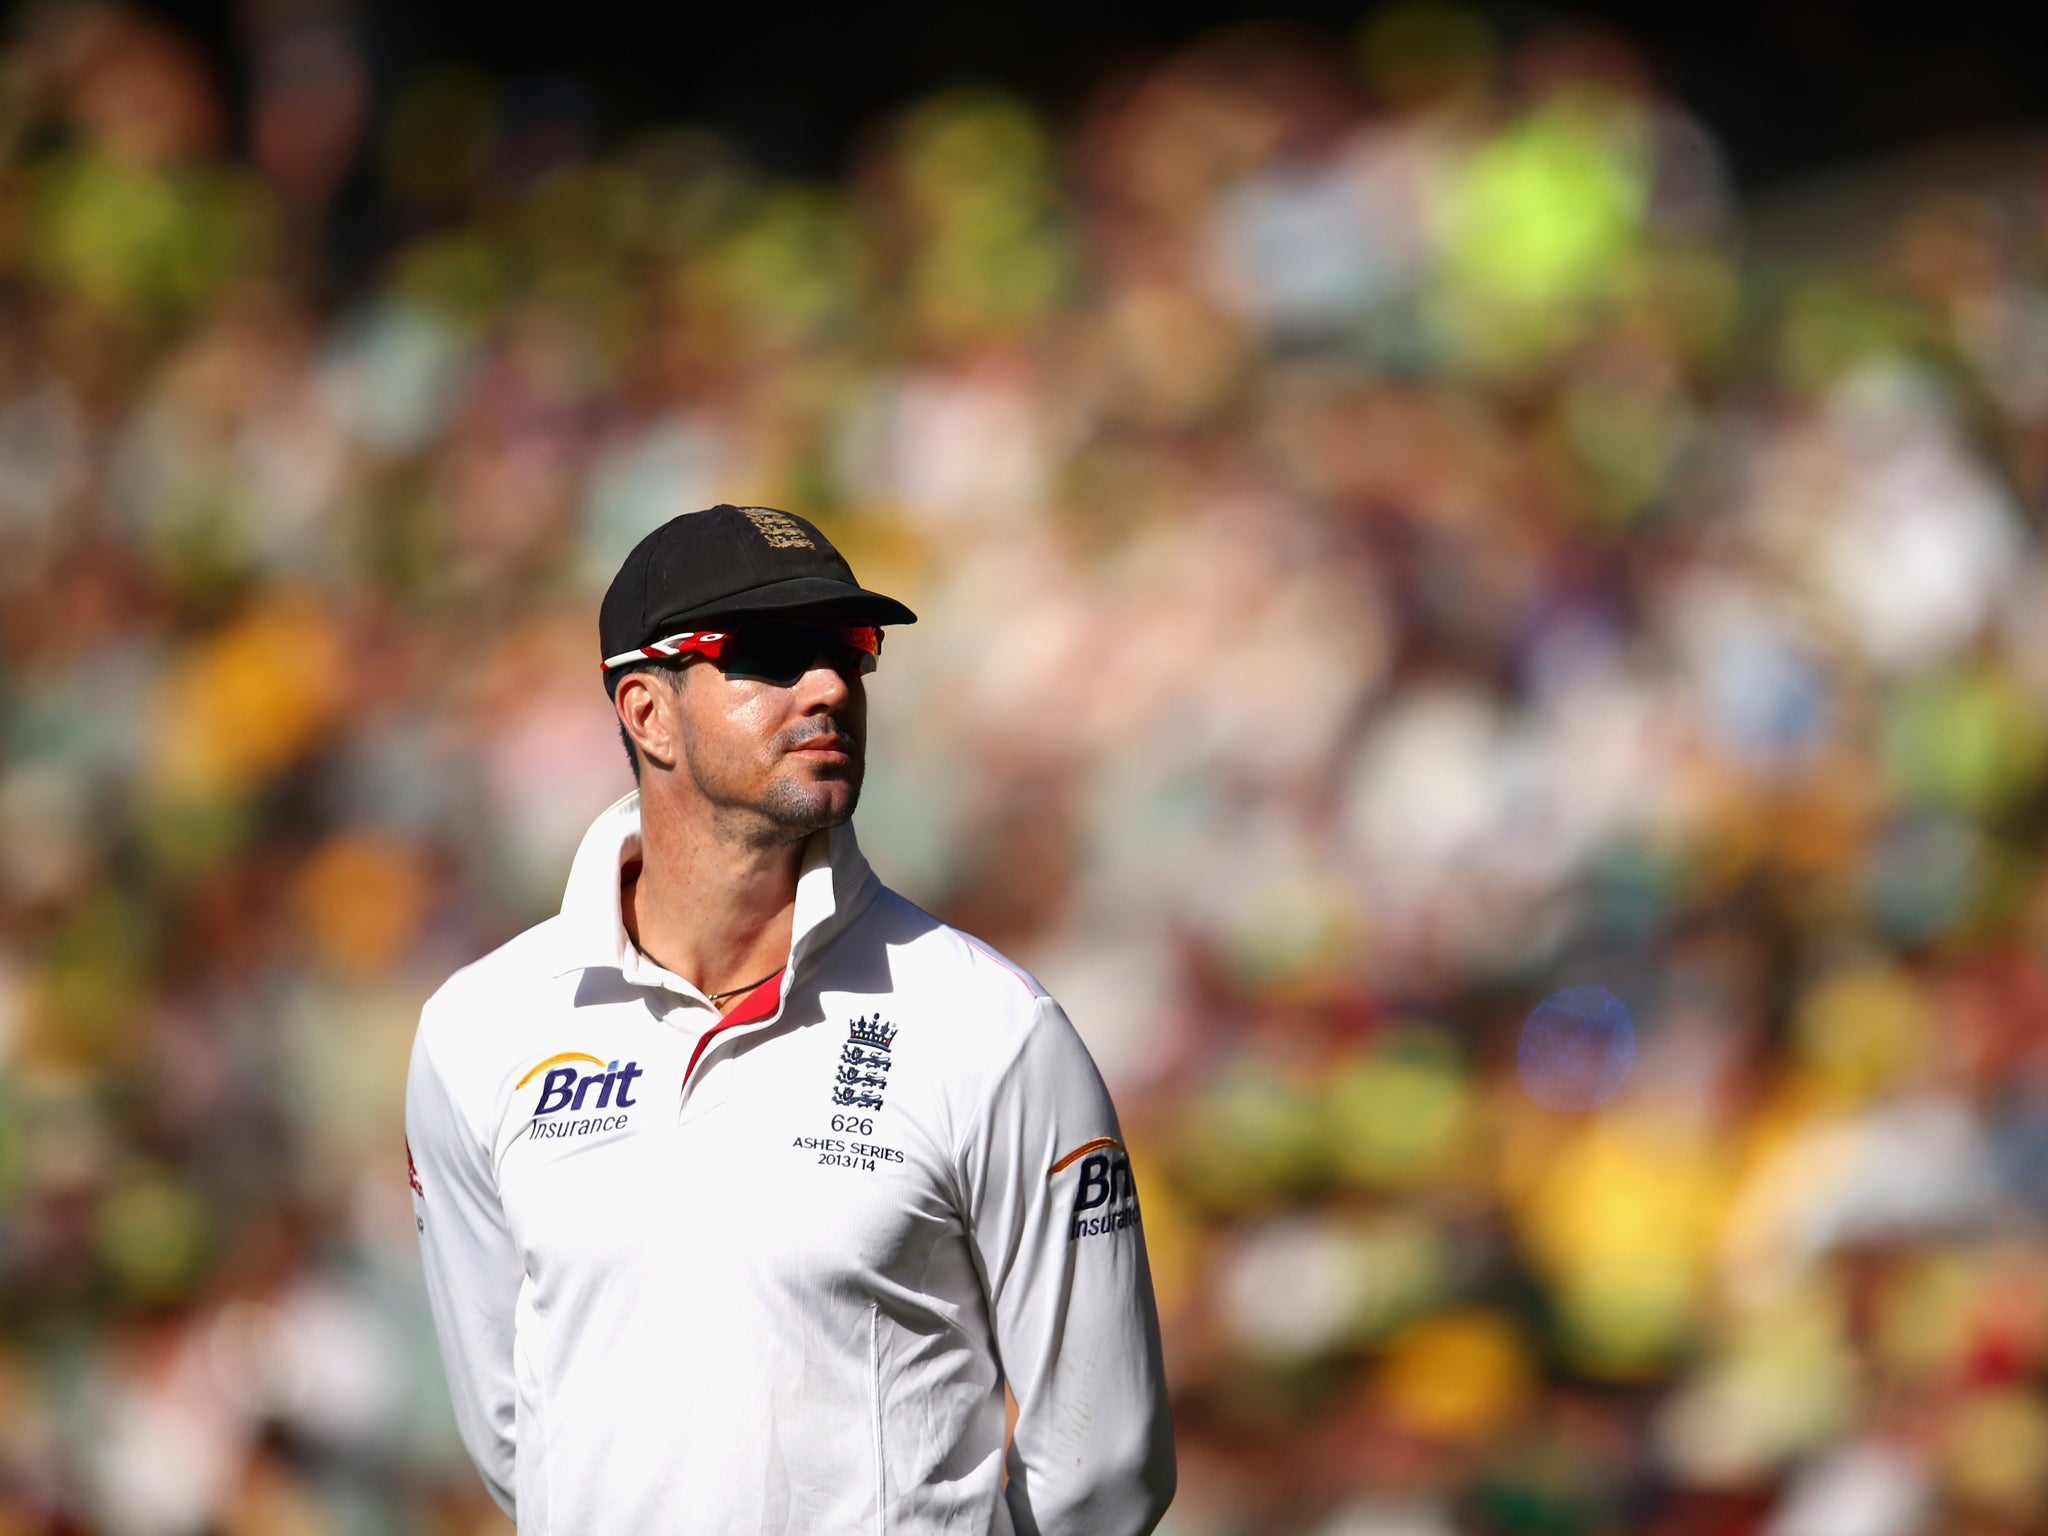 Kevin Pietersen looks on as England crumble once against in the Fourth Ashes Test in Melbourne